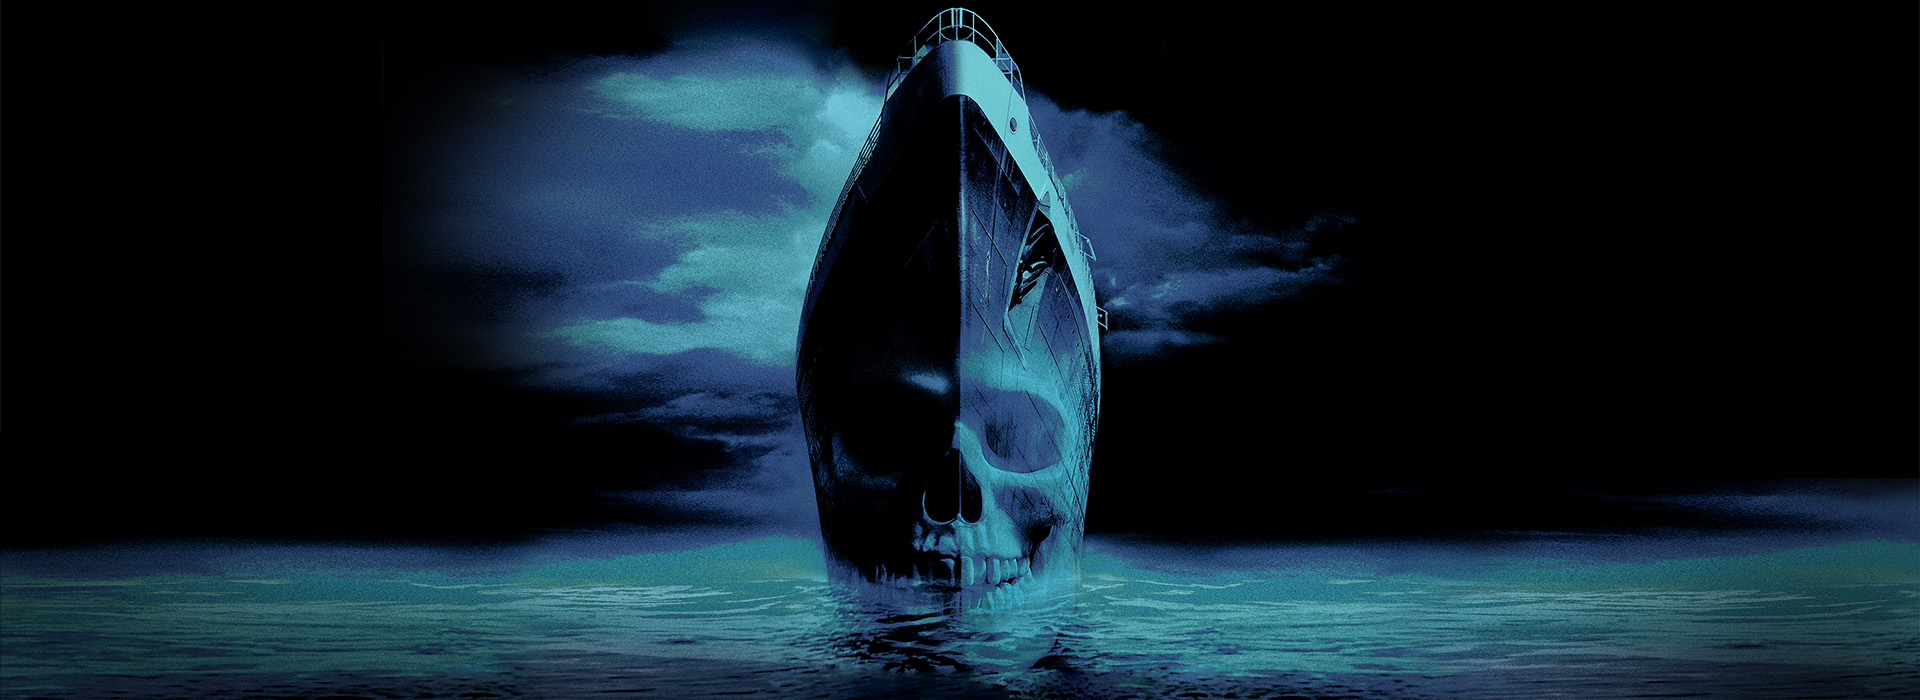 Movie poster Ghost Ship